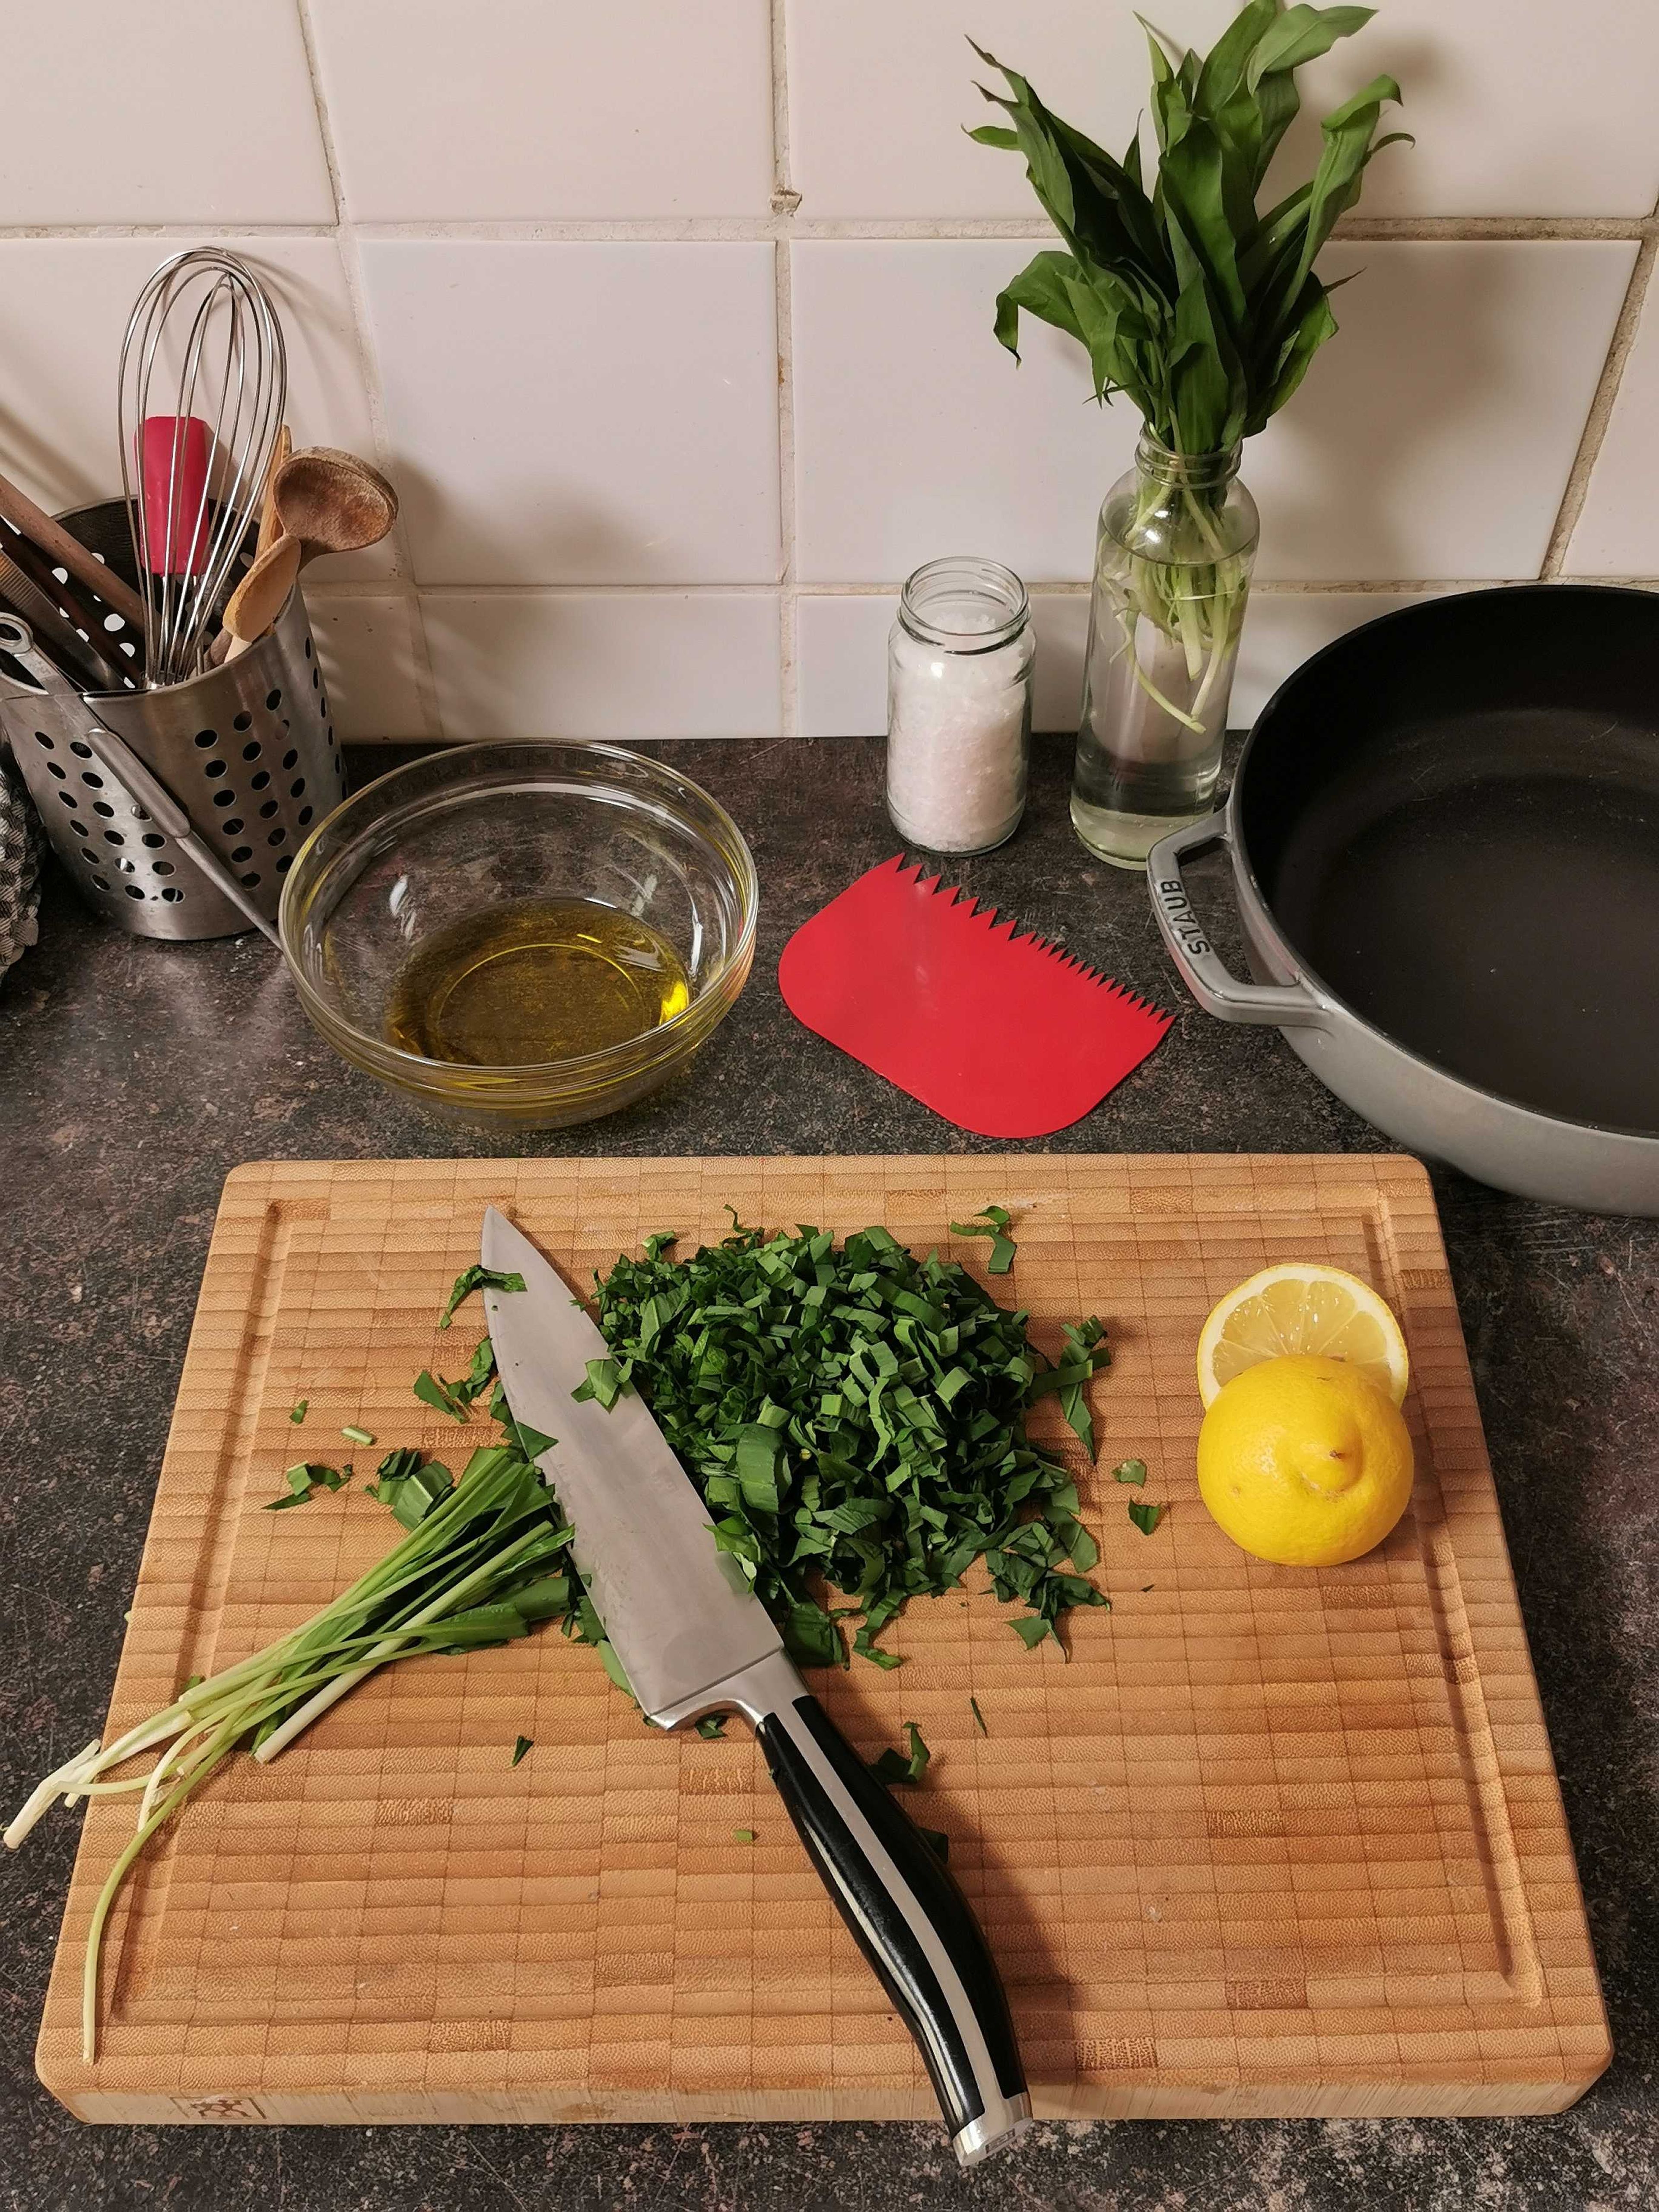 In the meantime, prepare the wild garlic oil. Finely chop the wild garlic and add to a bowl with the remaining olive oil, lemon juice, and salt, and mix well.